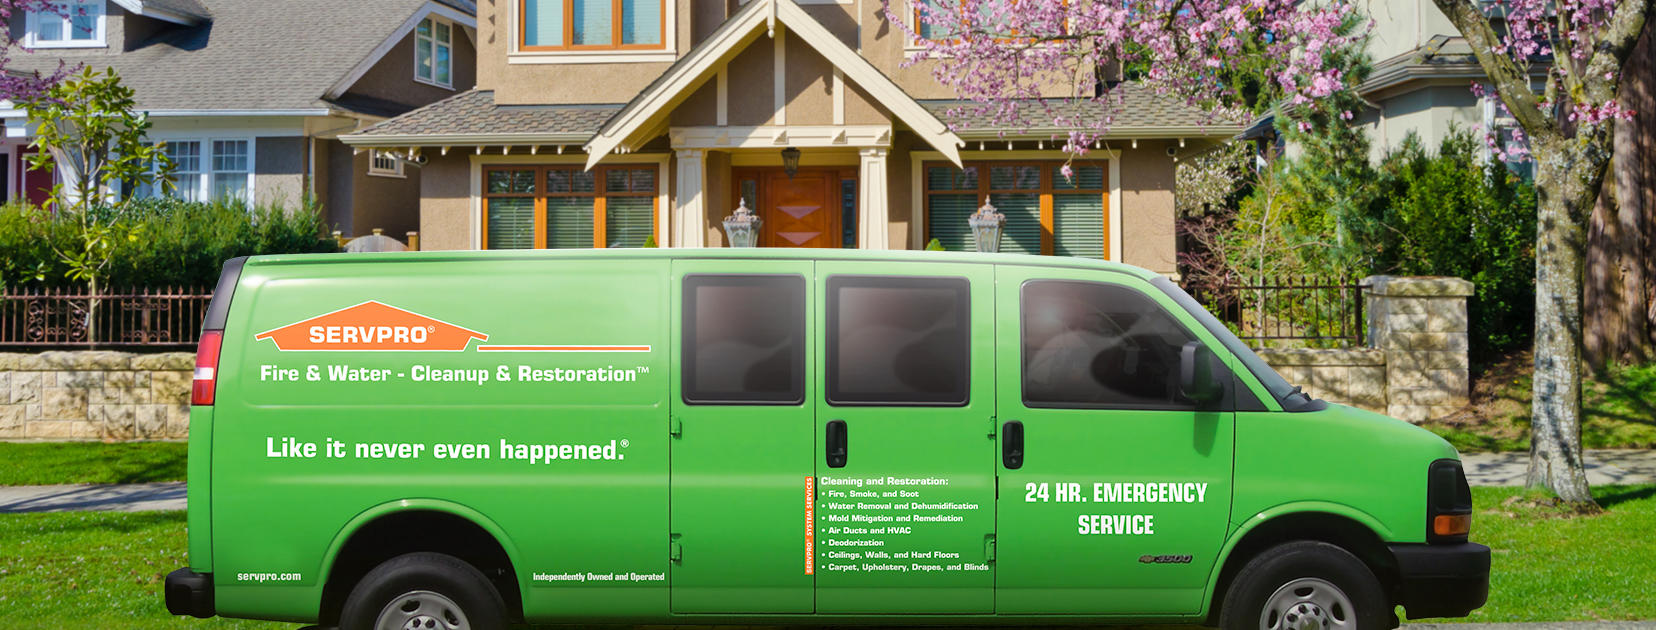 Your residence is top of mind at SERVPRO.